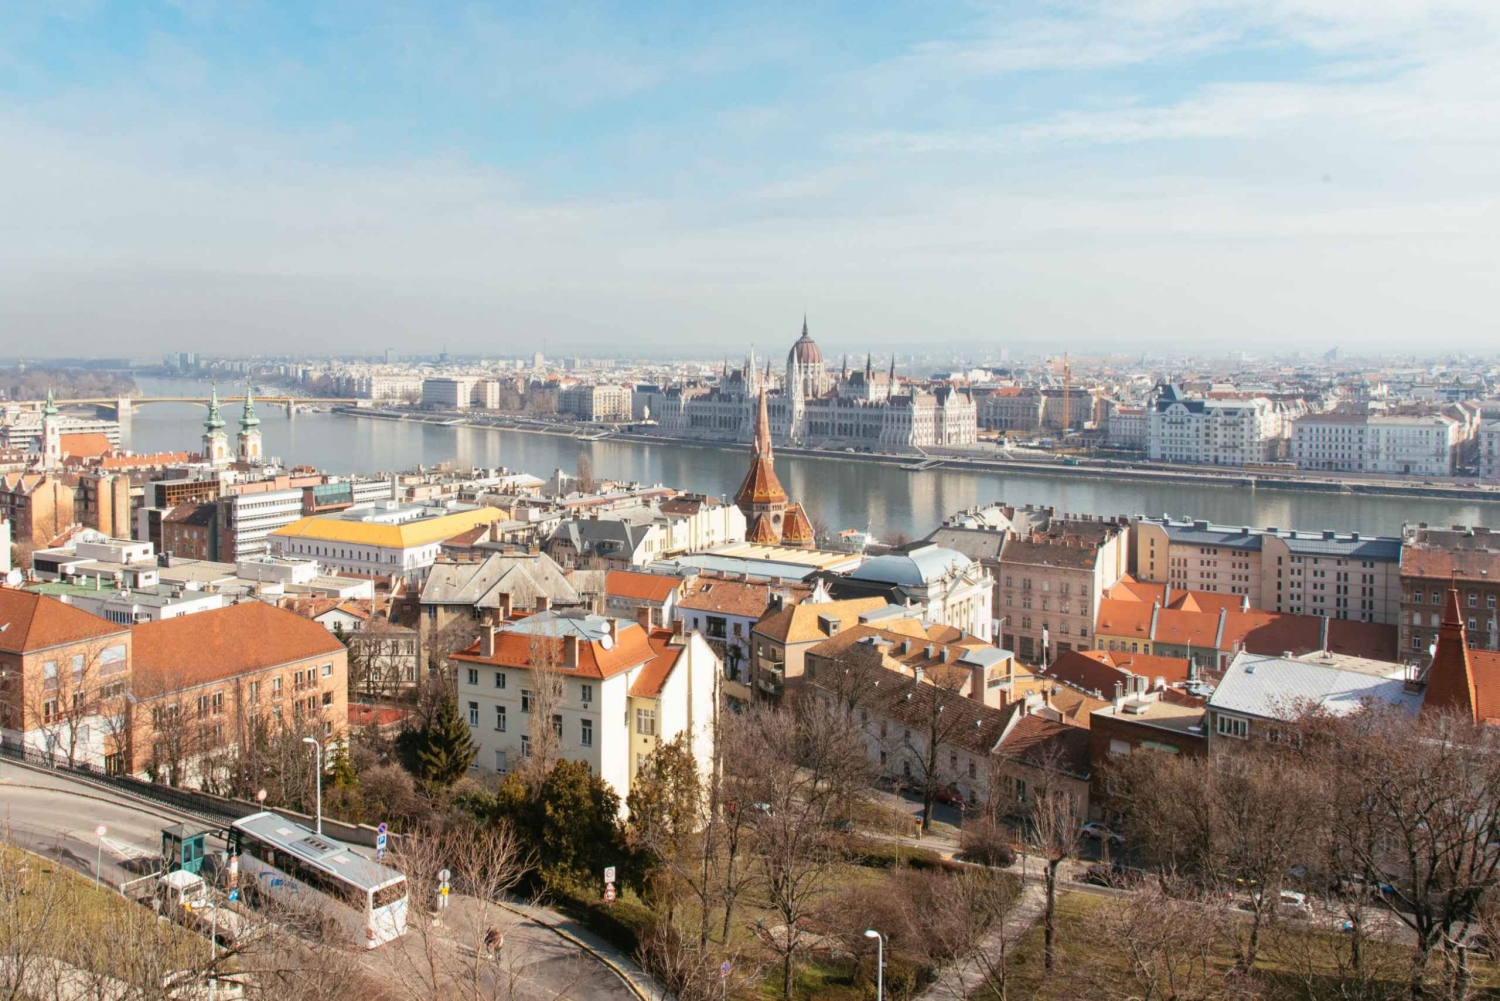 Budapest: Buda Castle District Walking Tour with a Historian